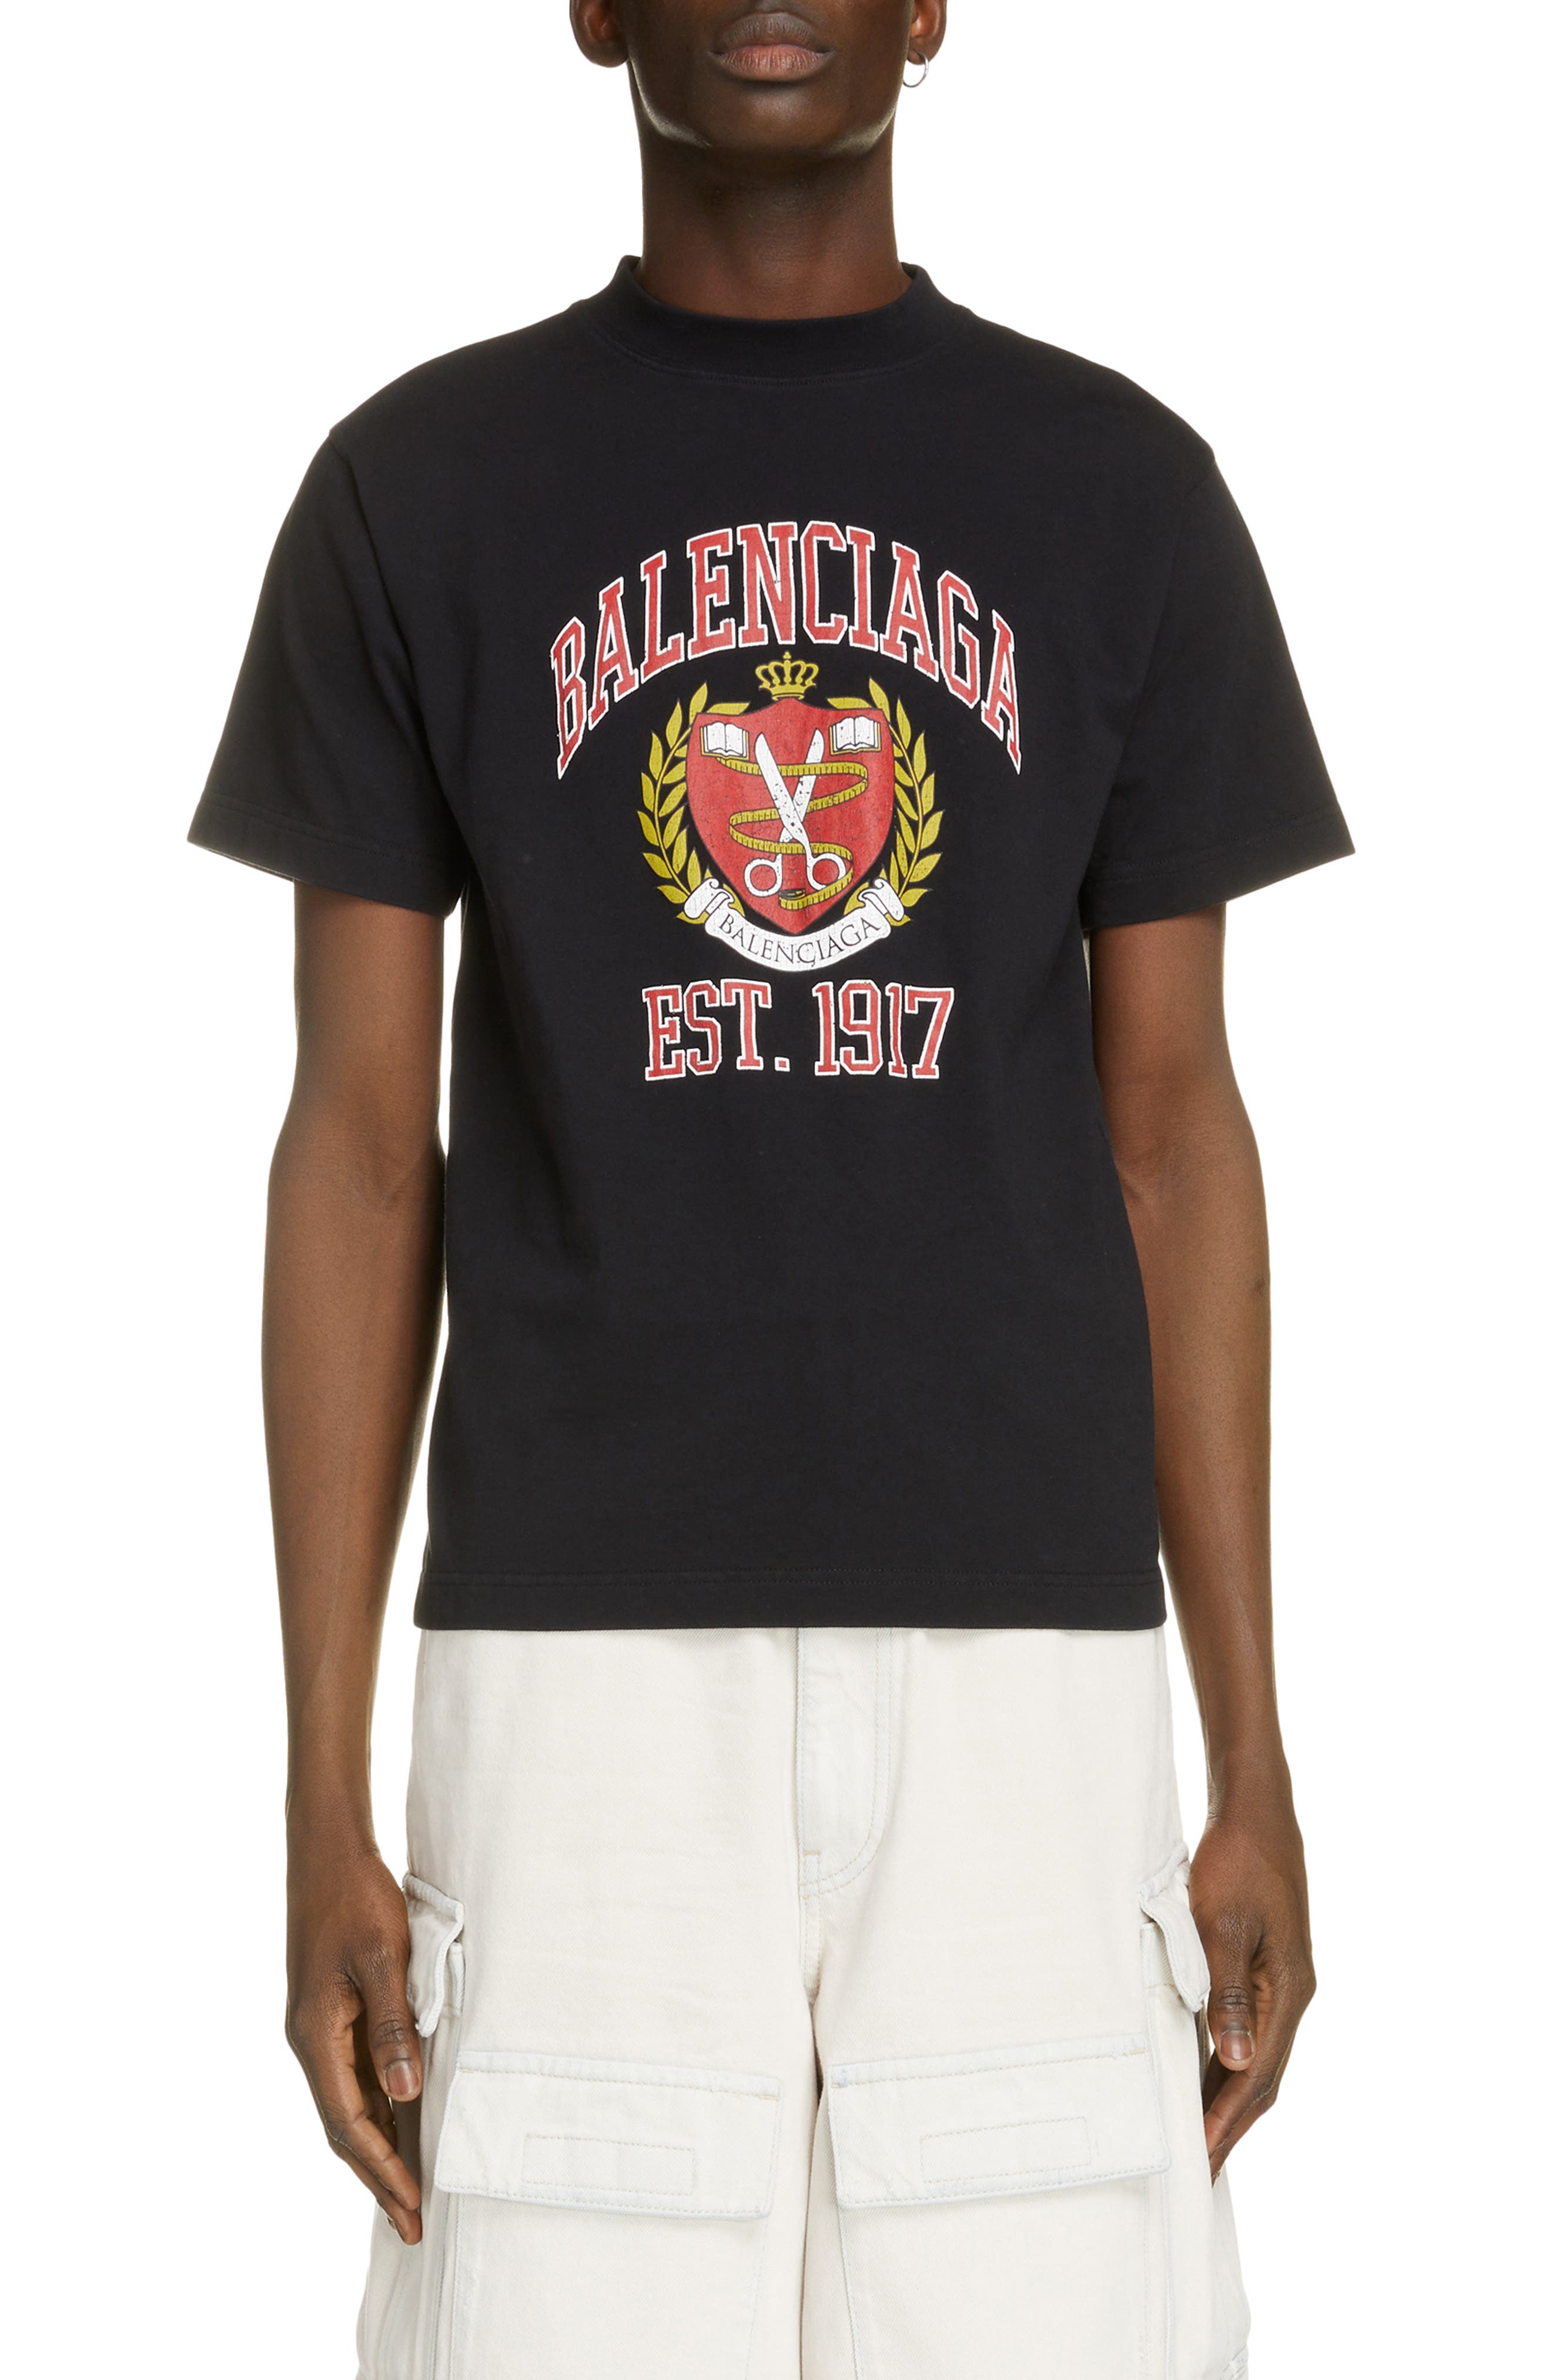 Balenciaga Small Fit College Graphic Tee in Black/Red at Nordstrom, Size X-Large